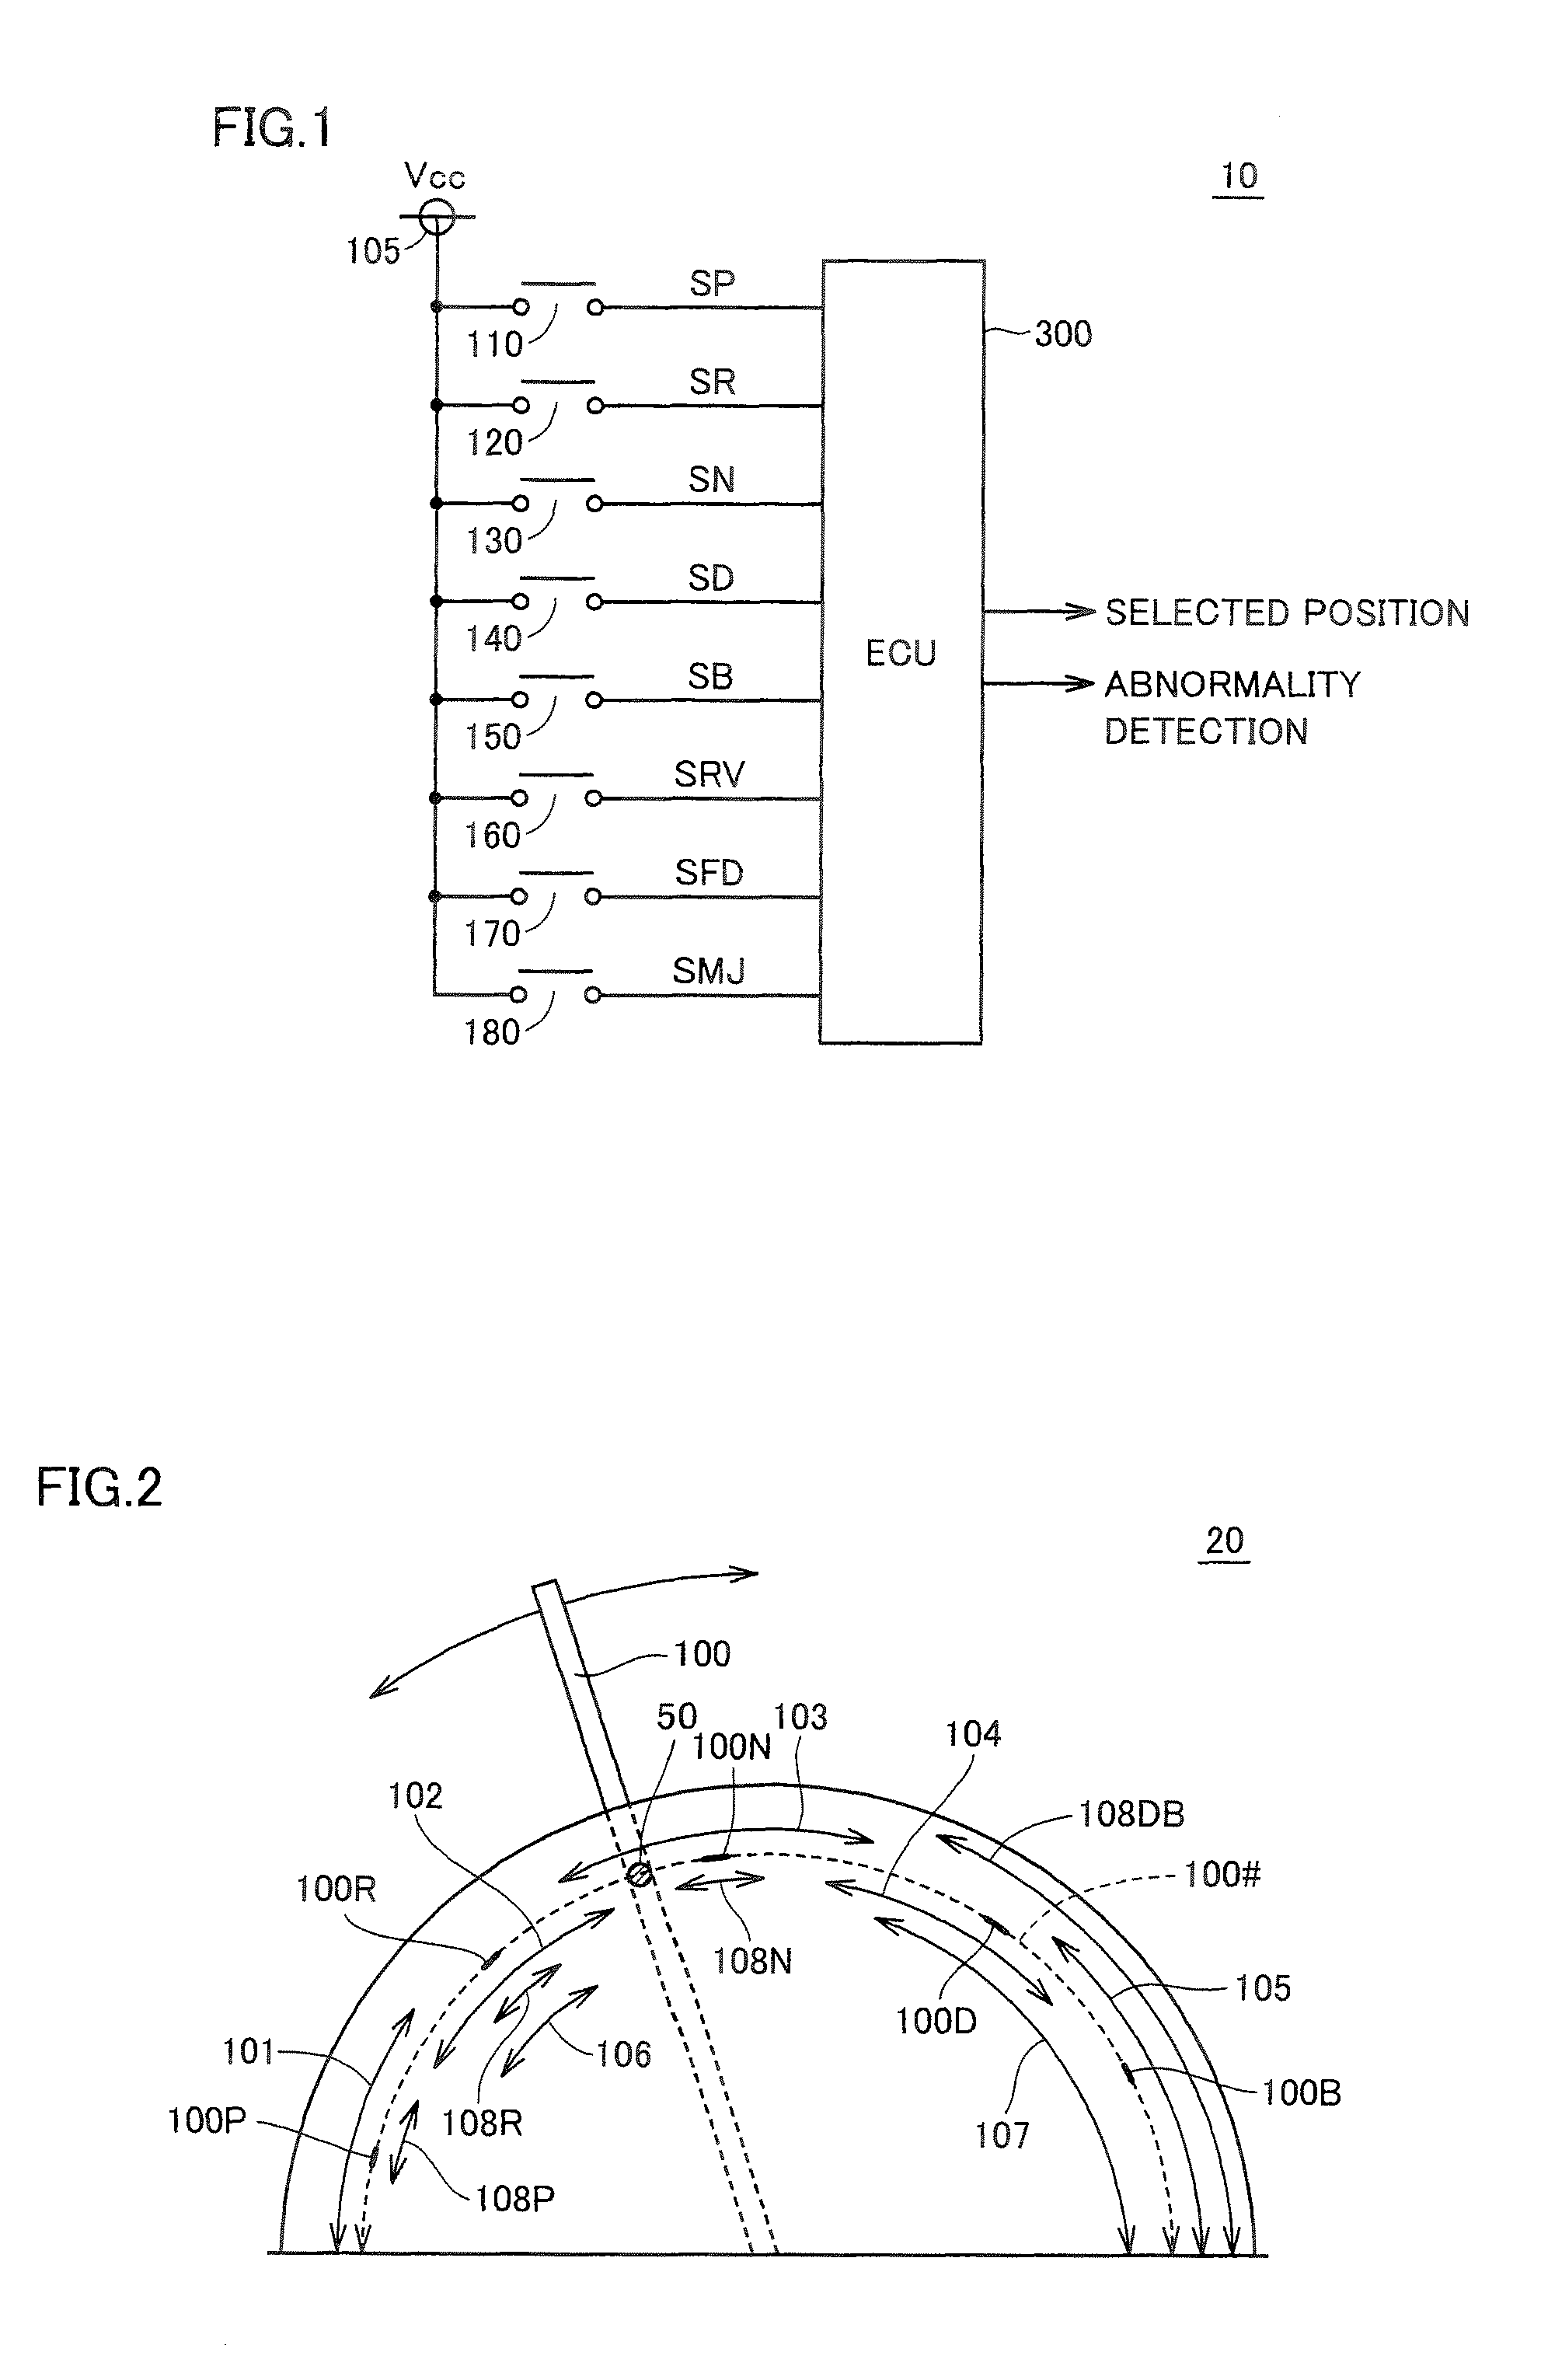 Abnormality detection device of shift position sensor